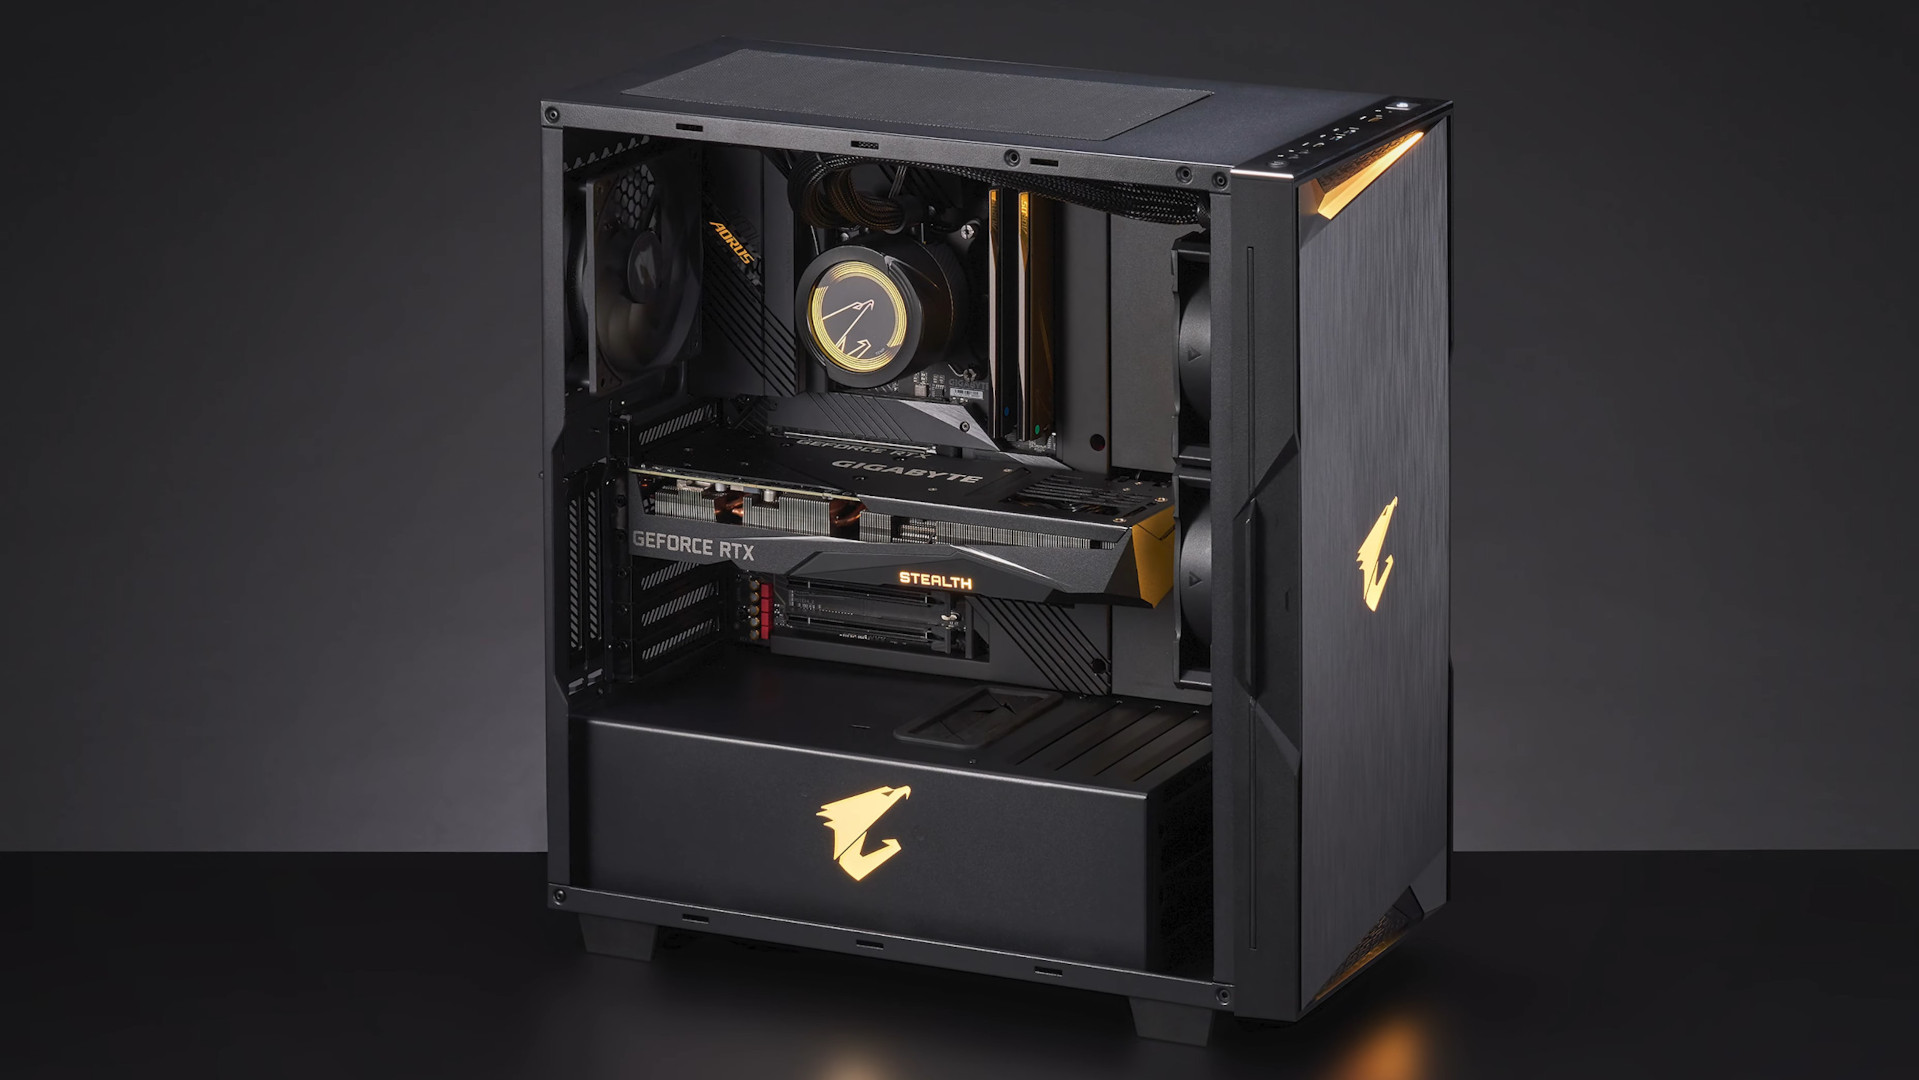 Project Stealth Gigabyte Aorus gaming PC bids goodbye to wires